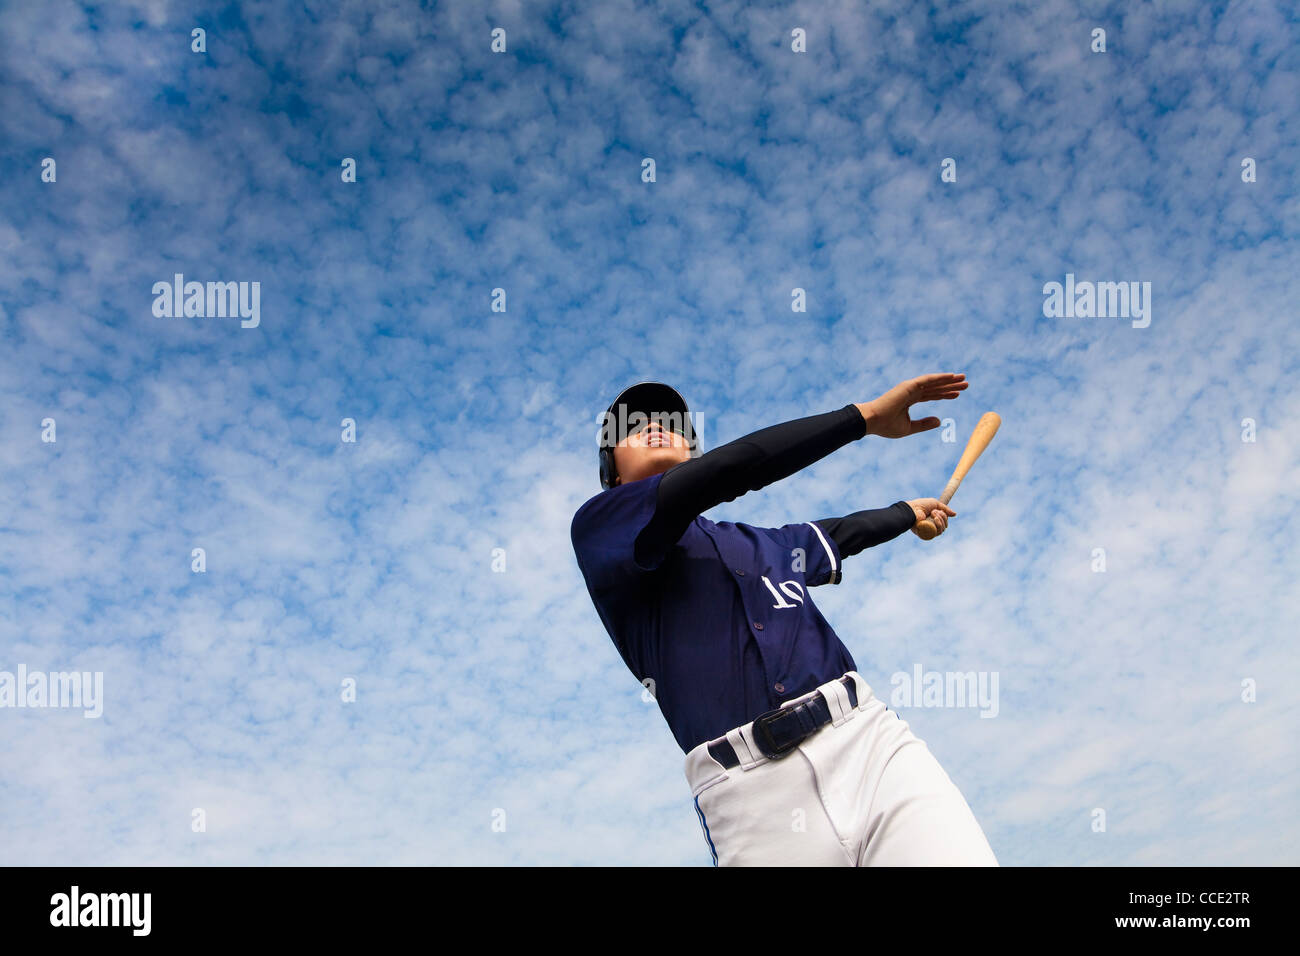 young baseball player taking a swing Stock Photo